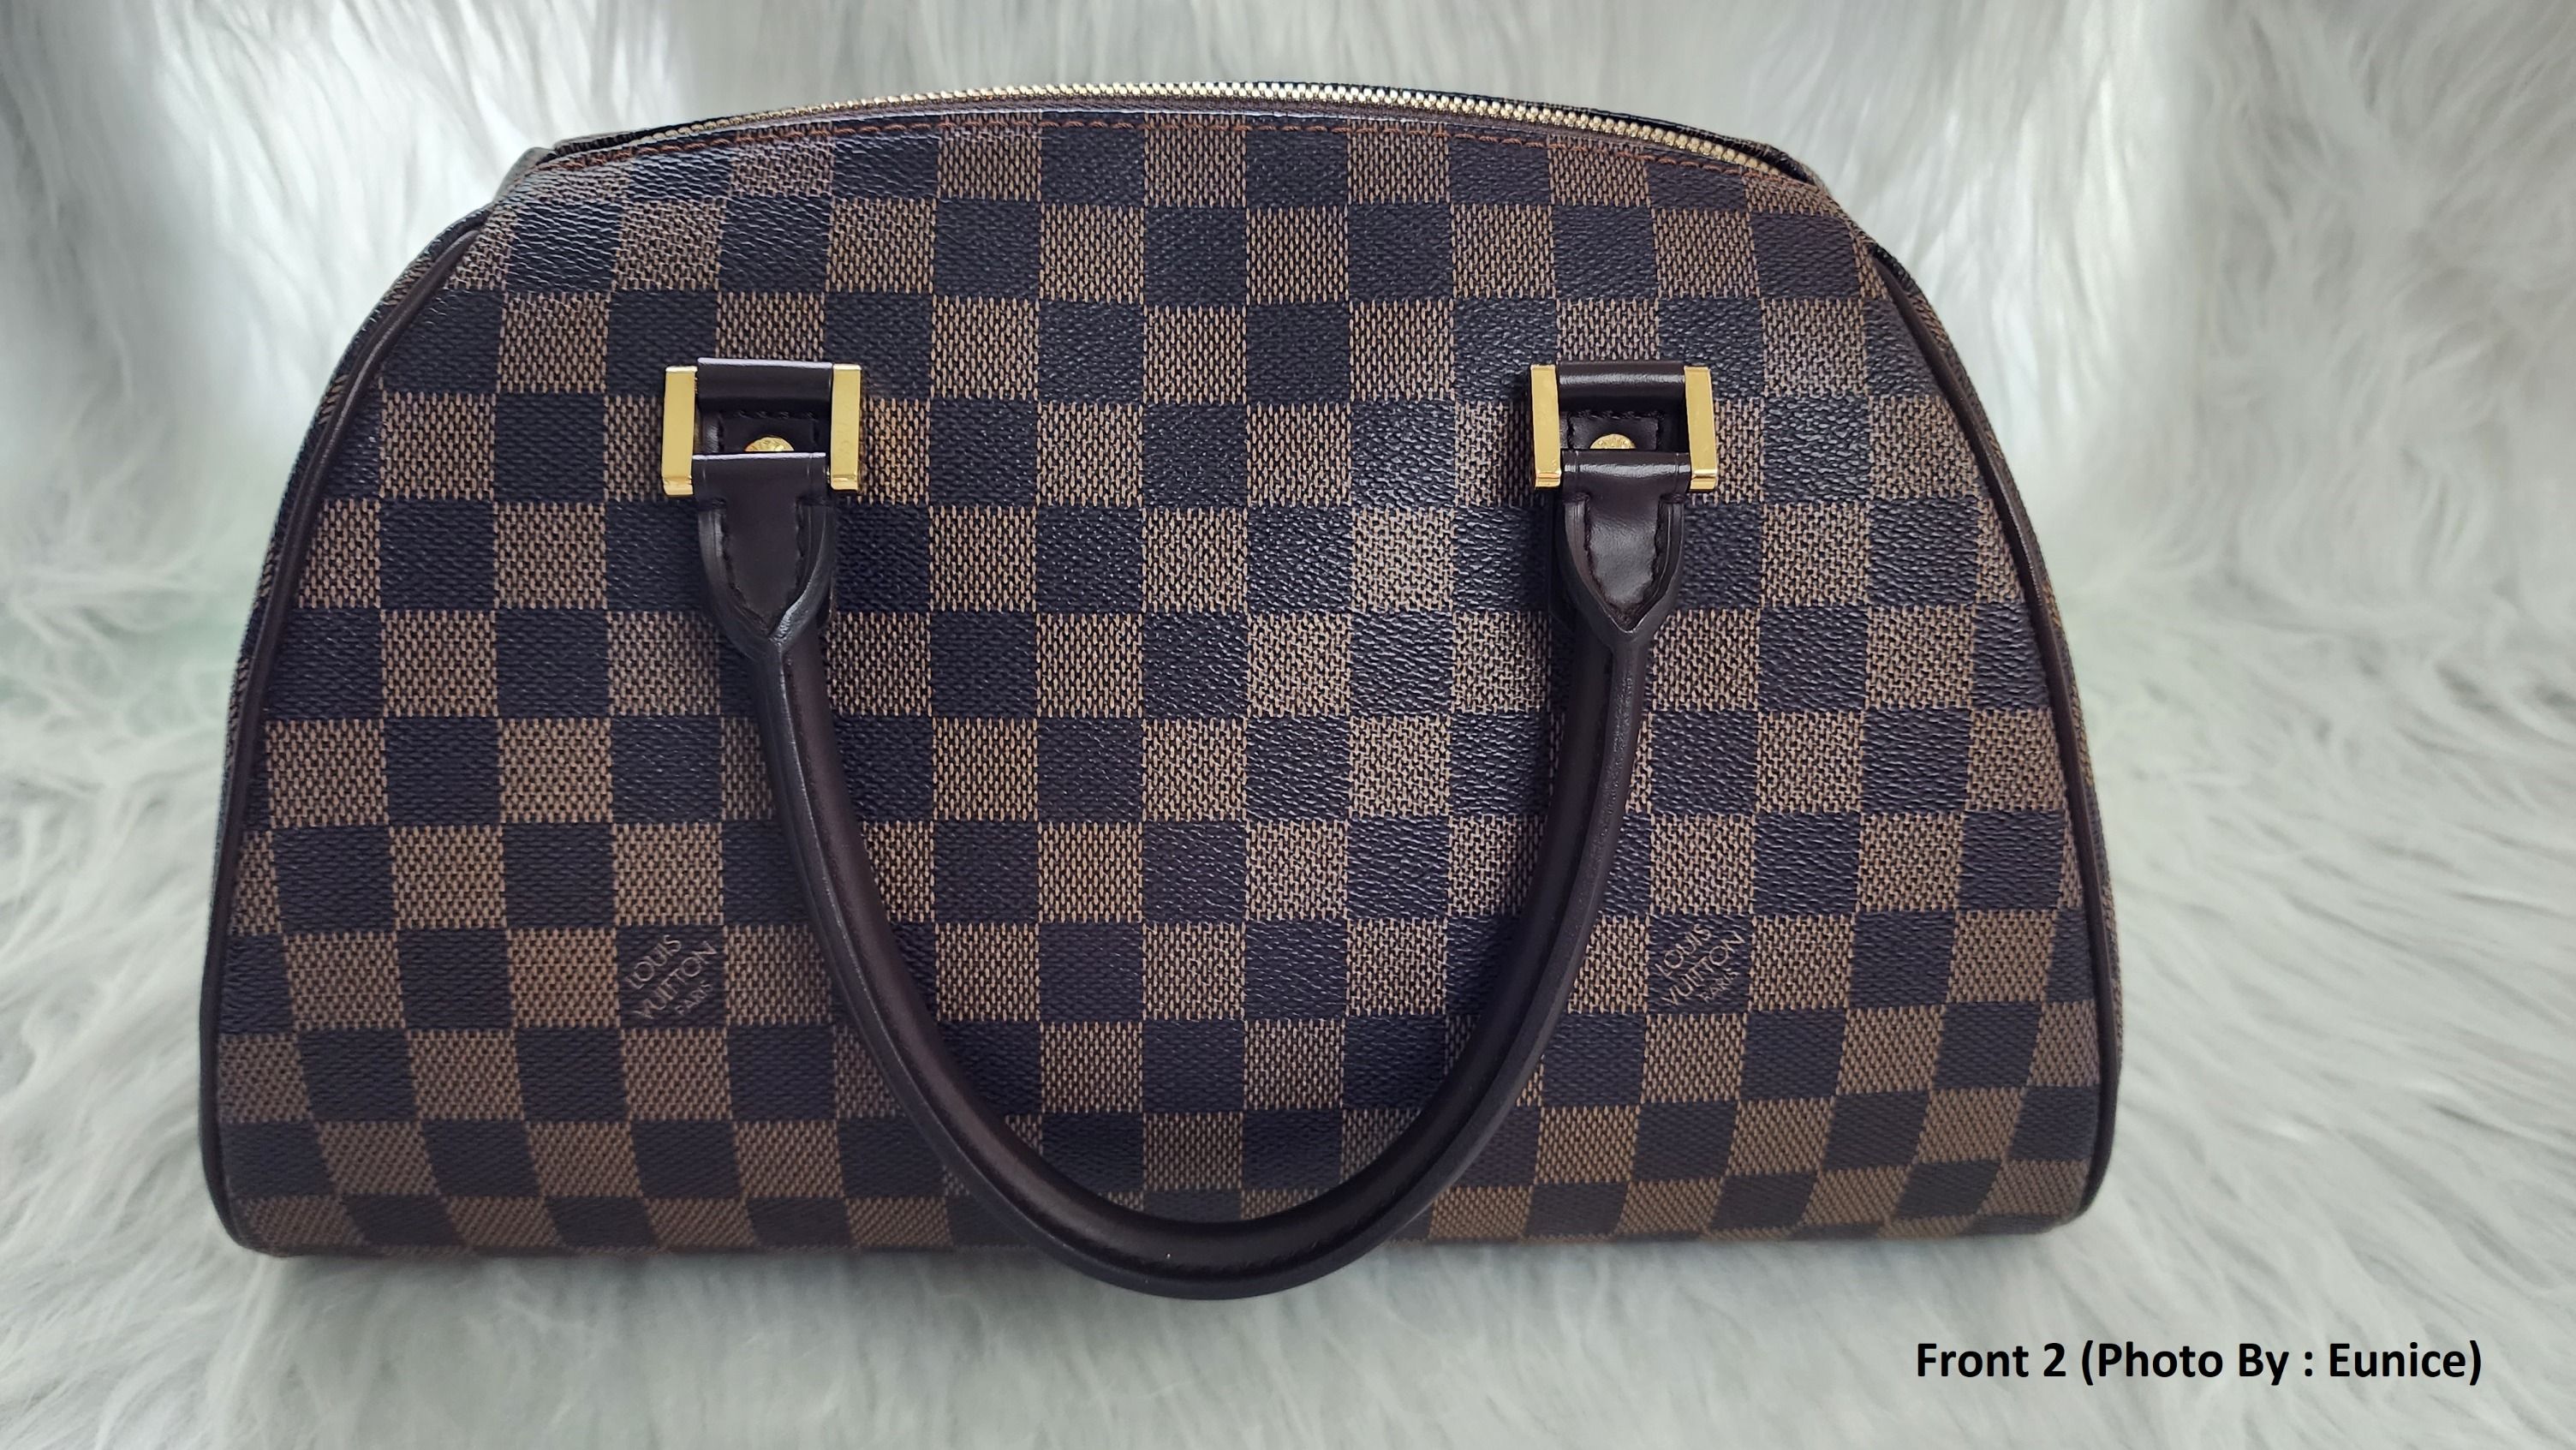 Reacting to LOUIS VUITTON'S DISCONTINUED BAGS/SLGs and CANVAS goods